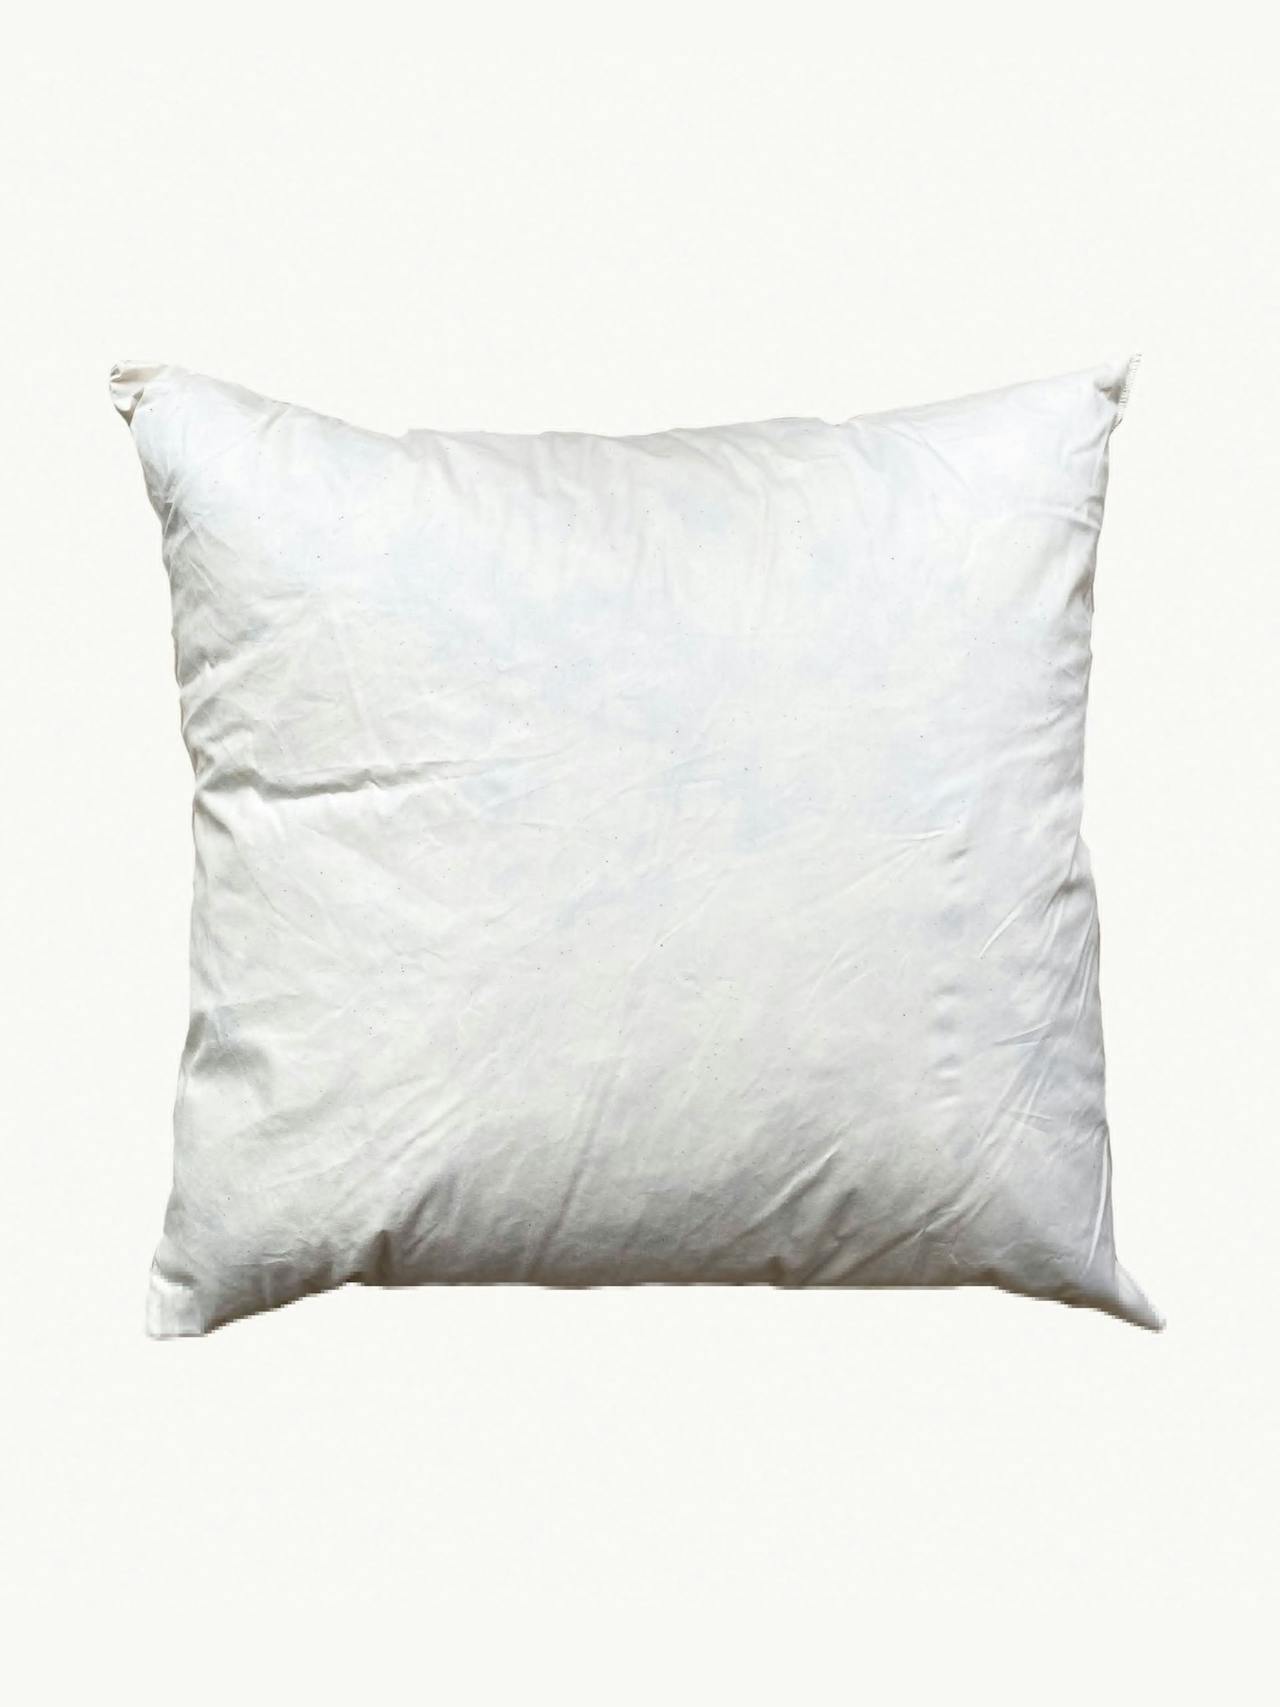 Square recycled cushion inner, 45 x 45cm